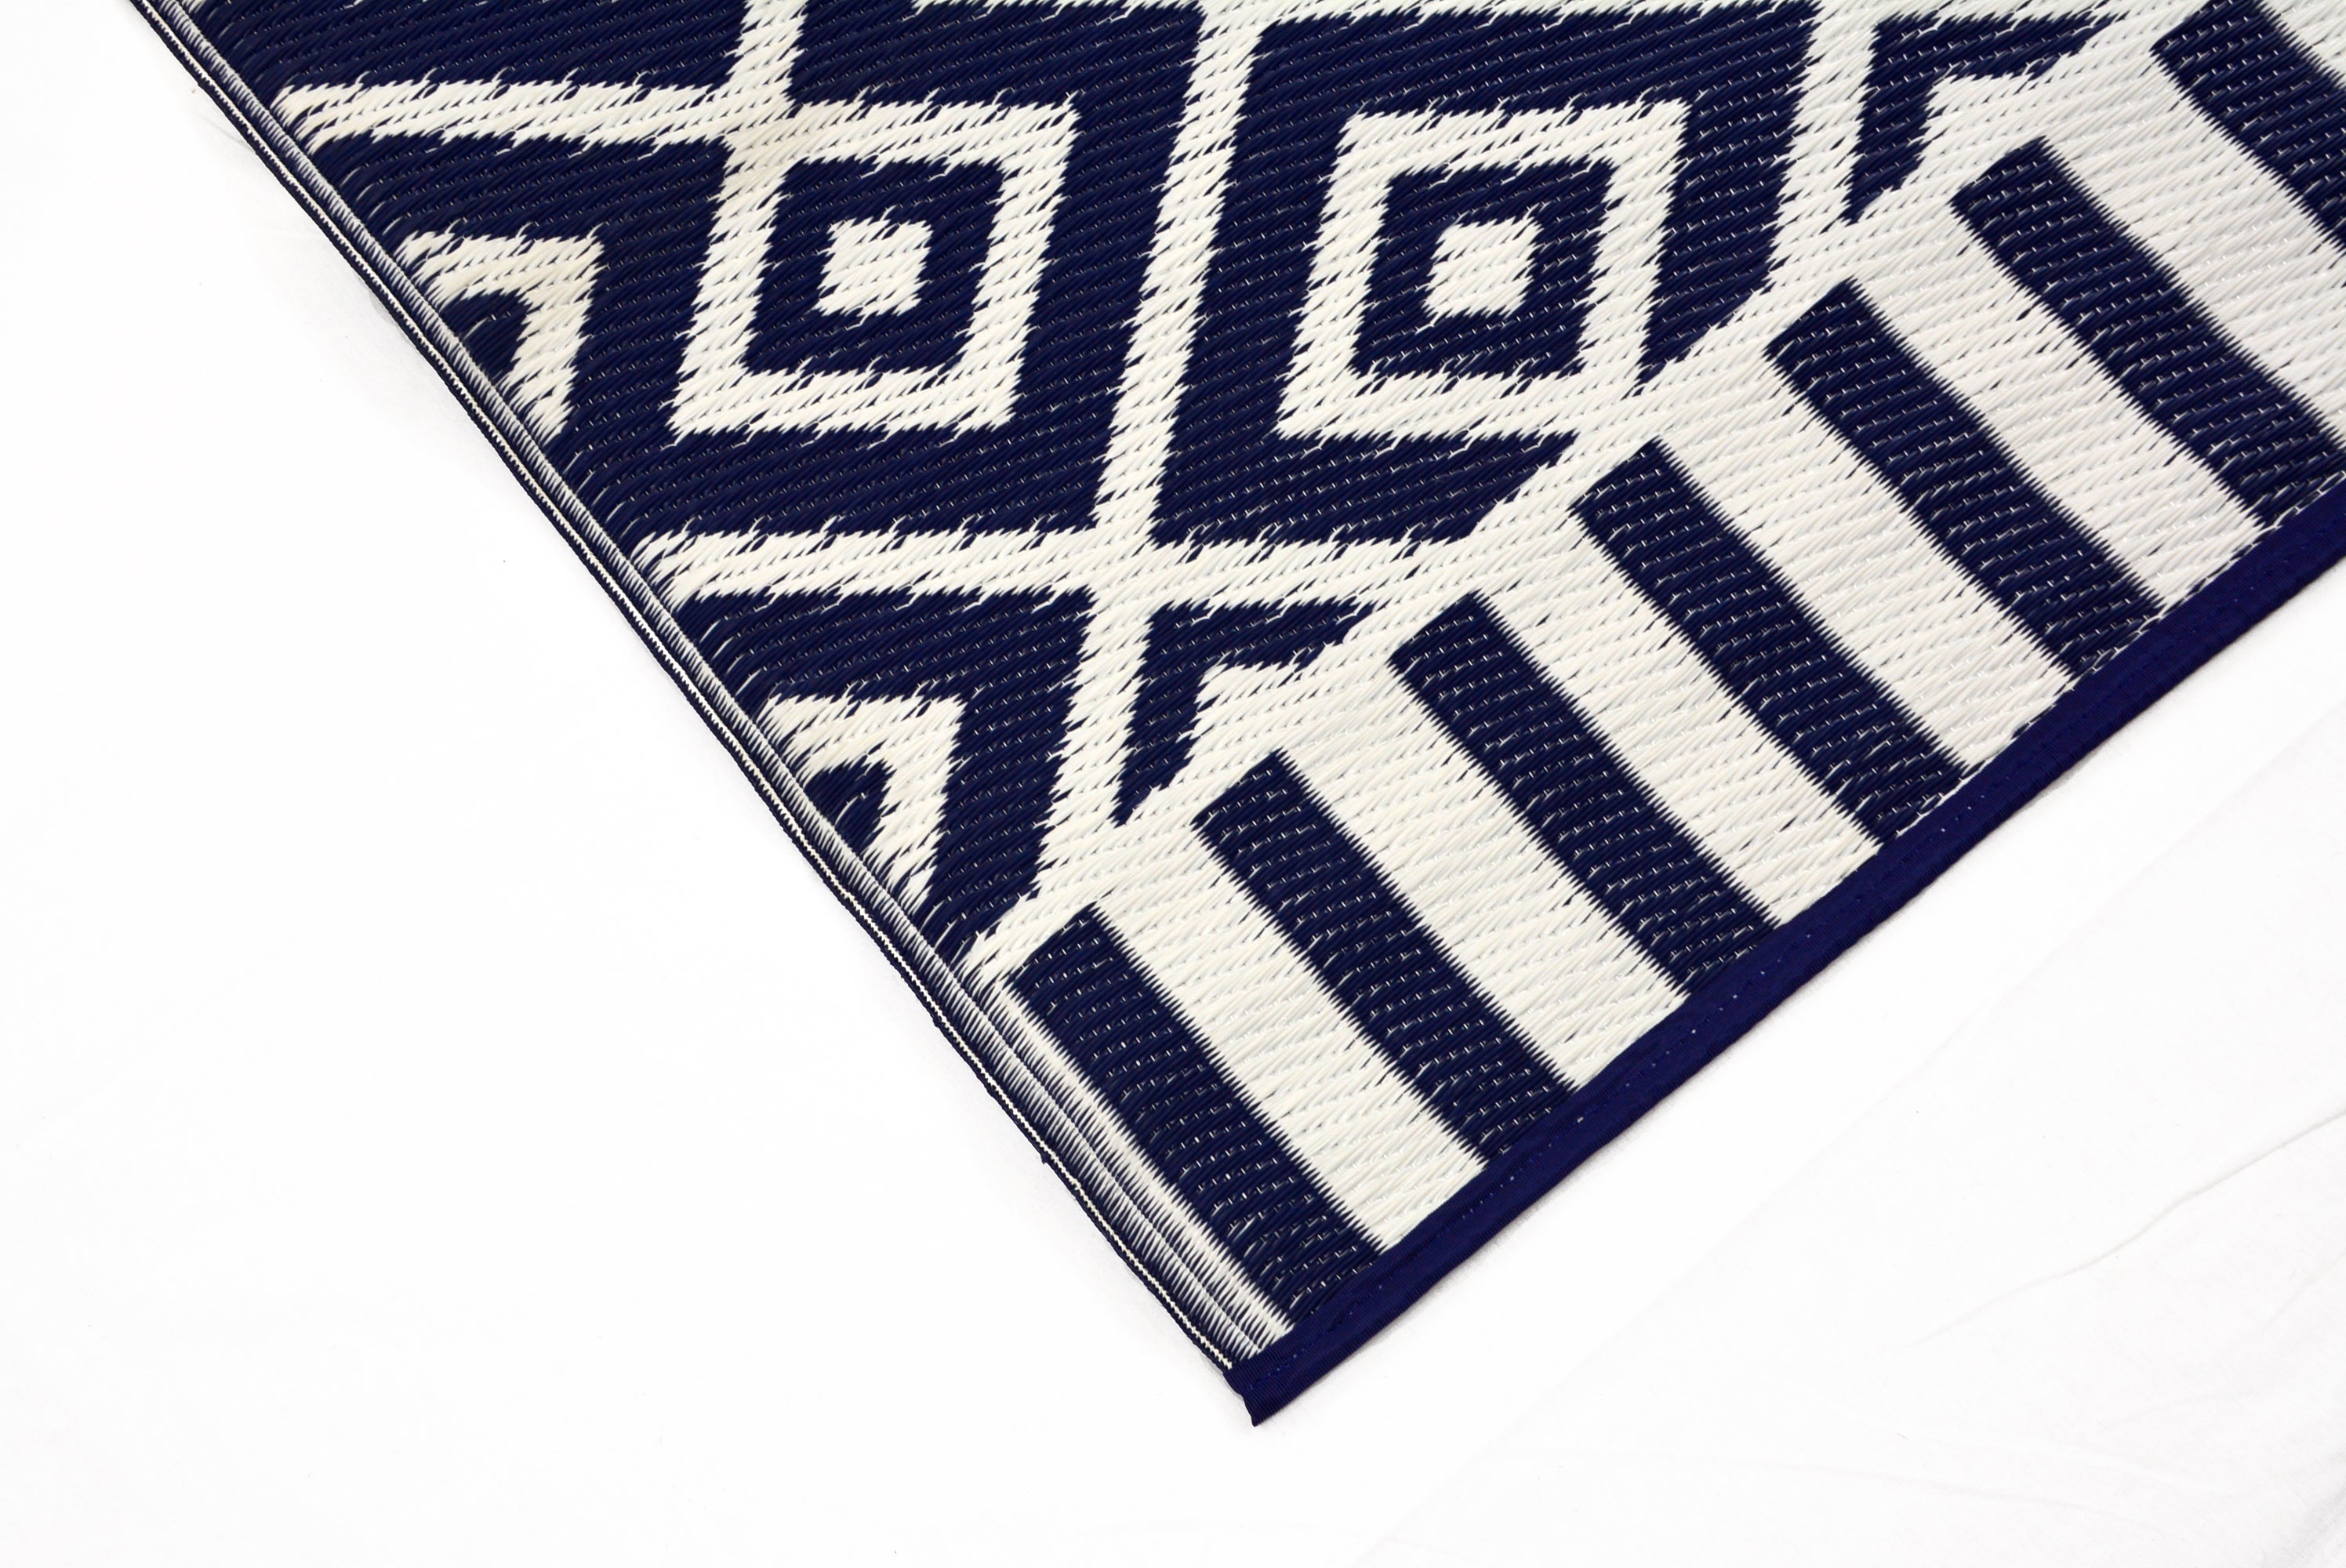 Reversible Indoor/Outdoor Mats - Chatai A002 - Navy/White-180x270